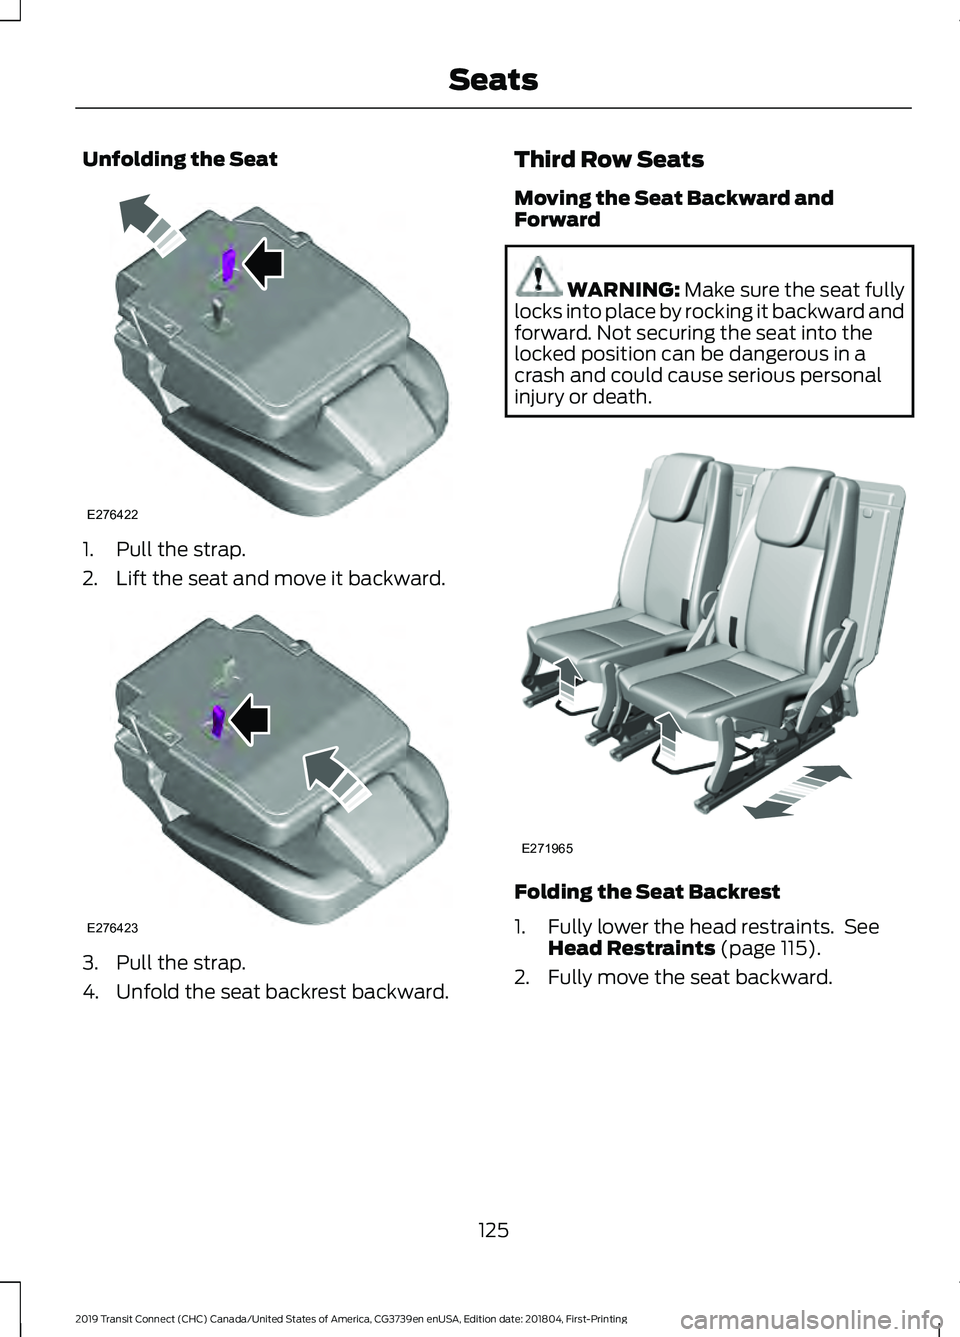 FORD TRANSIT CONNECT 2019 Owners Manual Unfolding the Seat
1. Pull the strap.
2. Lift the seat and move it backward.
3. Pull the strap.
4. Unfold the seat backrest backward. Third Row Seats
Moving the Seat Backward and
Forward WARNING: Make